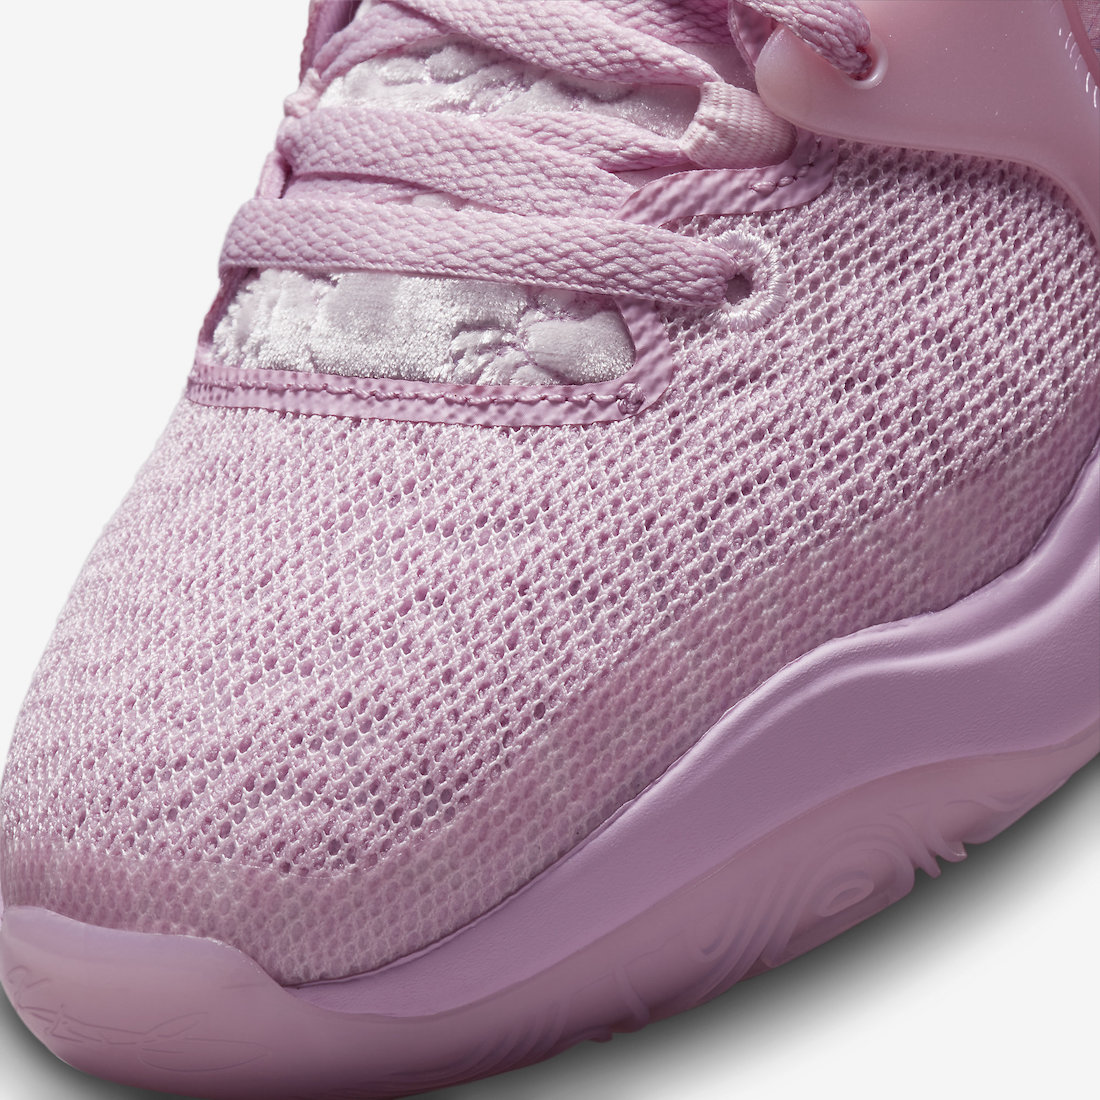 Nike KD 15 Aunt Pearl DQ3851 600 Release Date 6